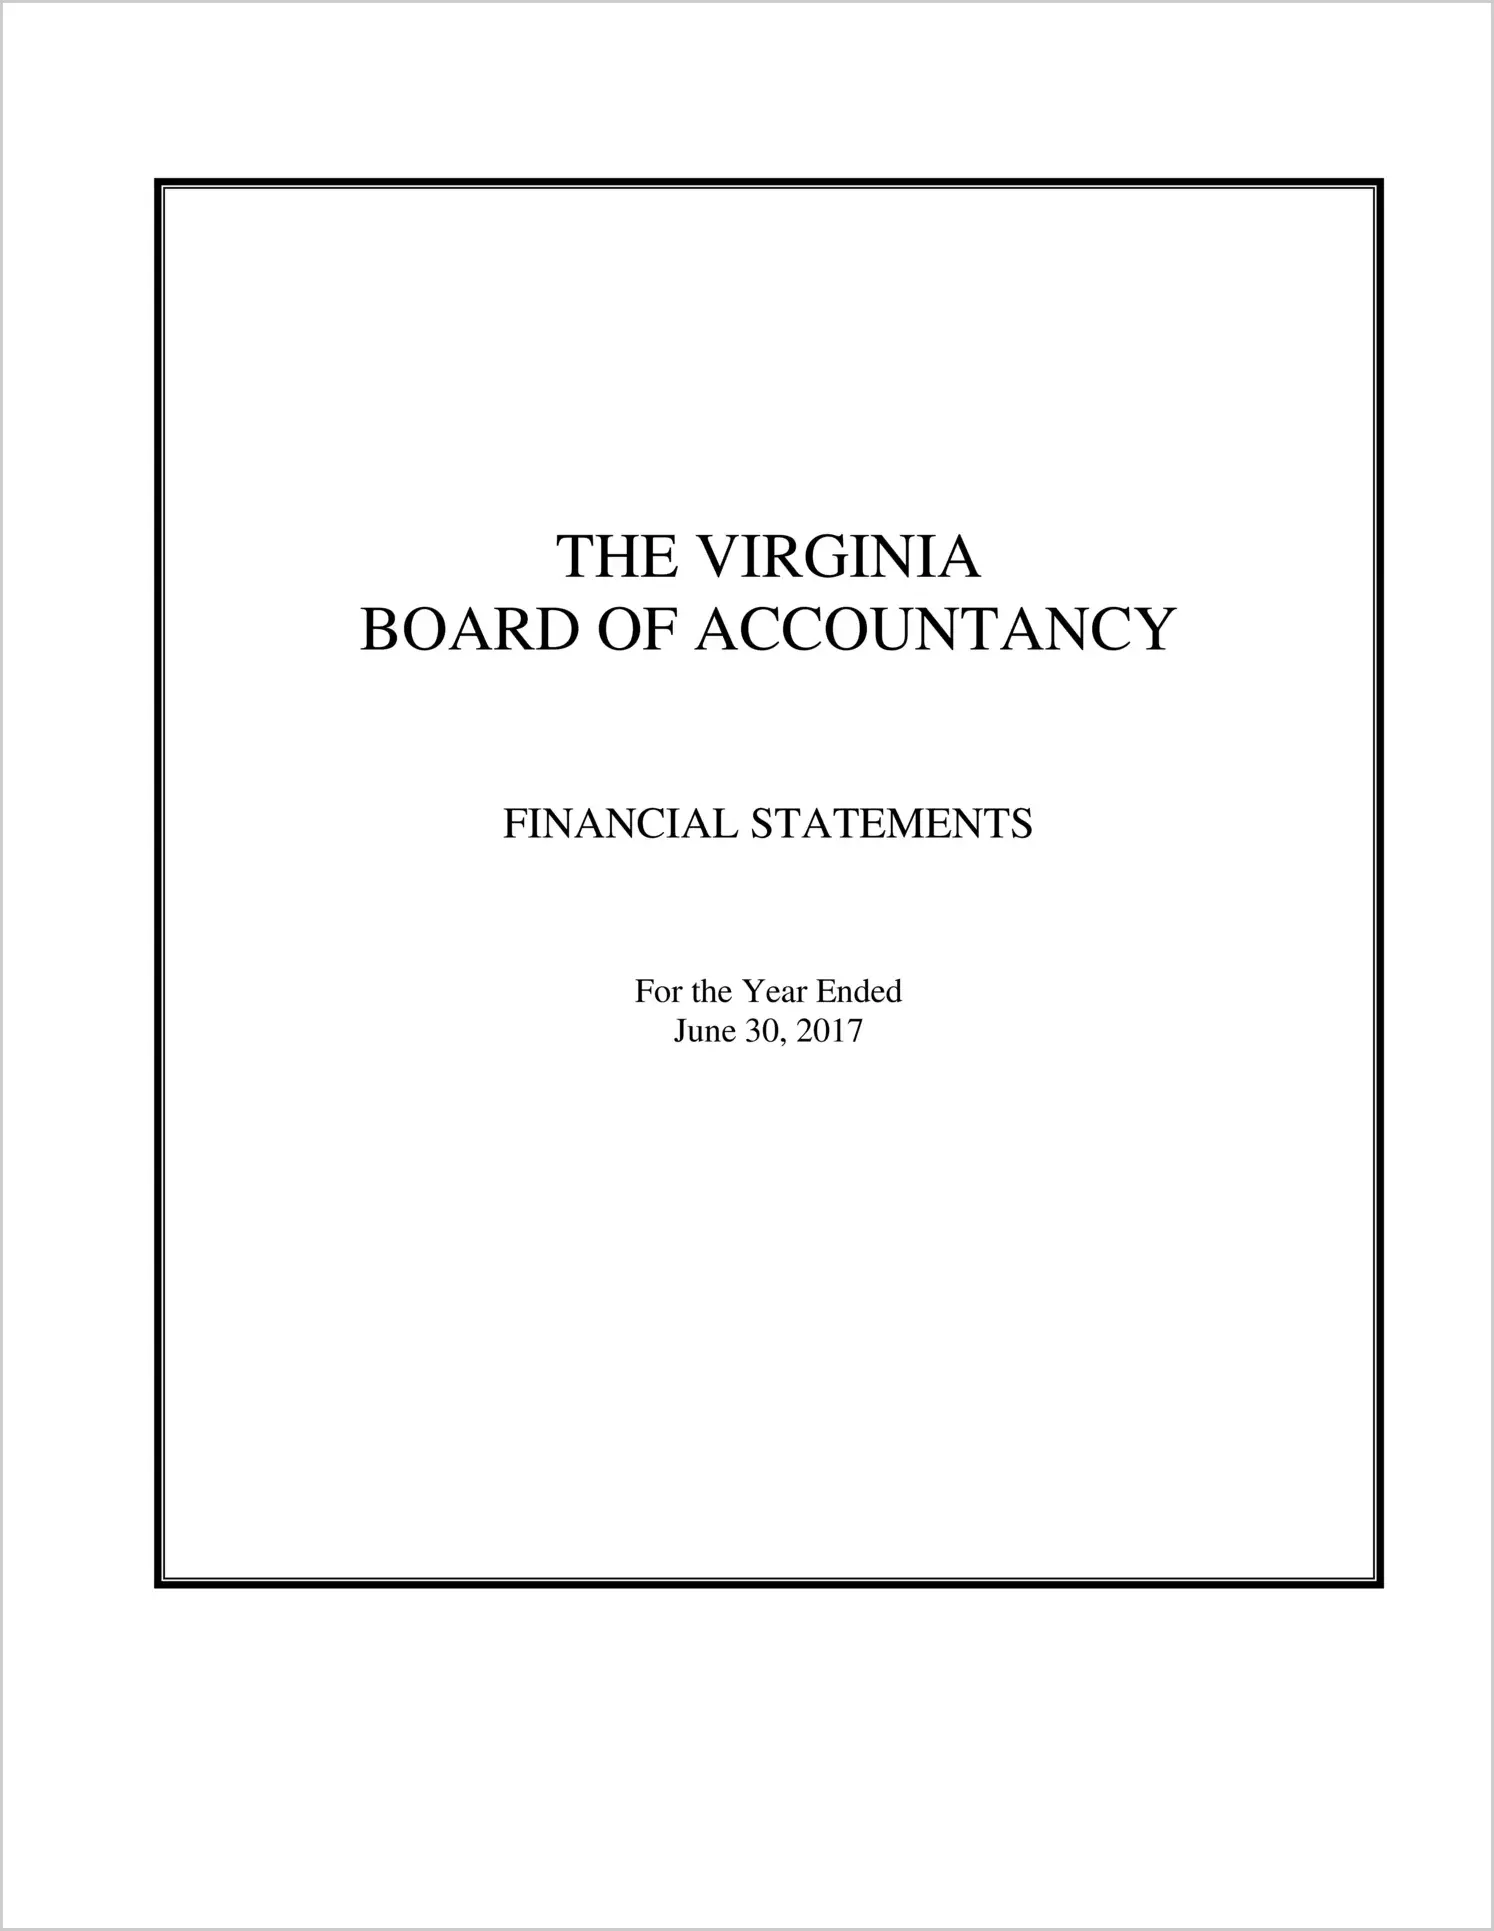 Virginia Board of Accountancy Financial Statements for the year ended June 30, 2017